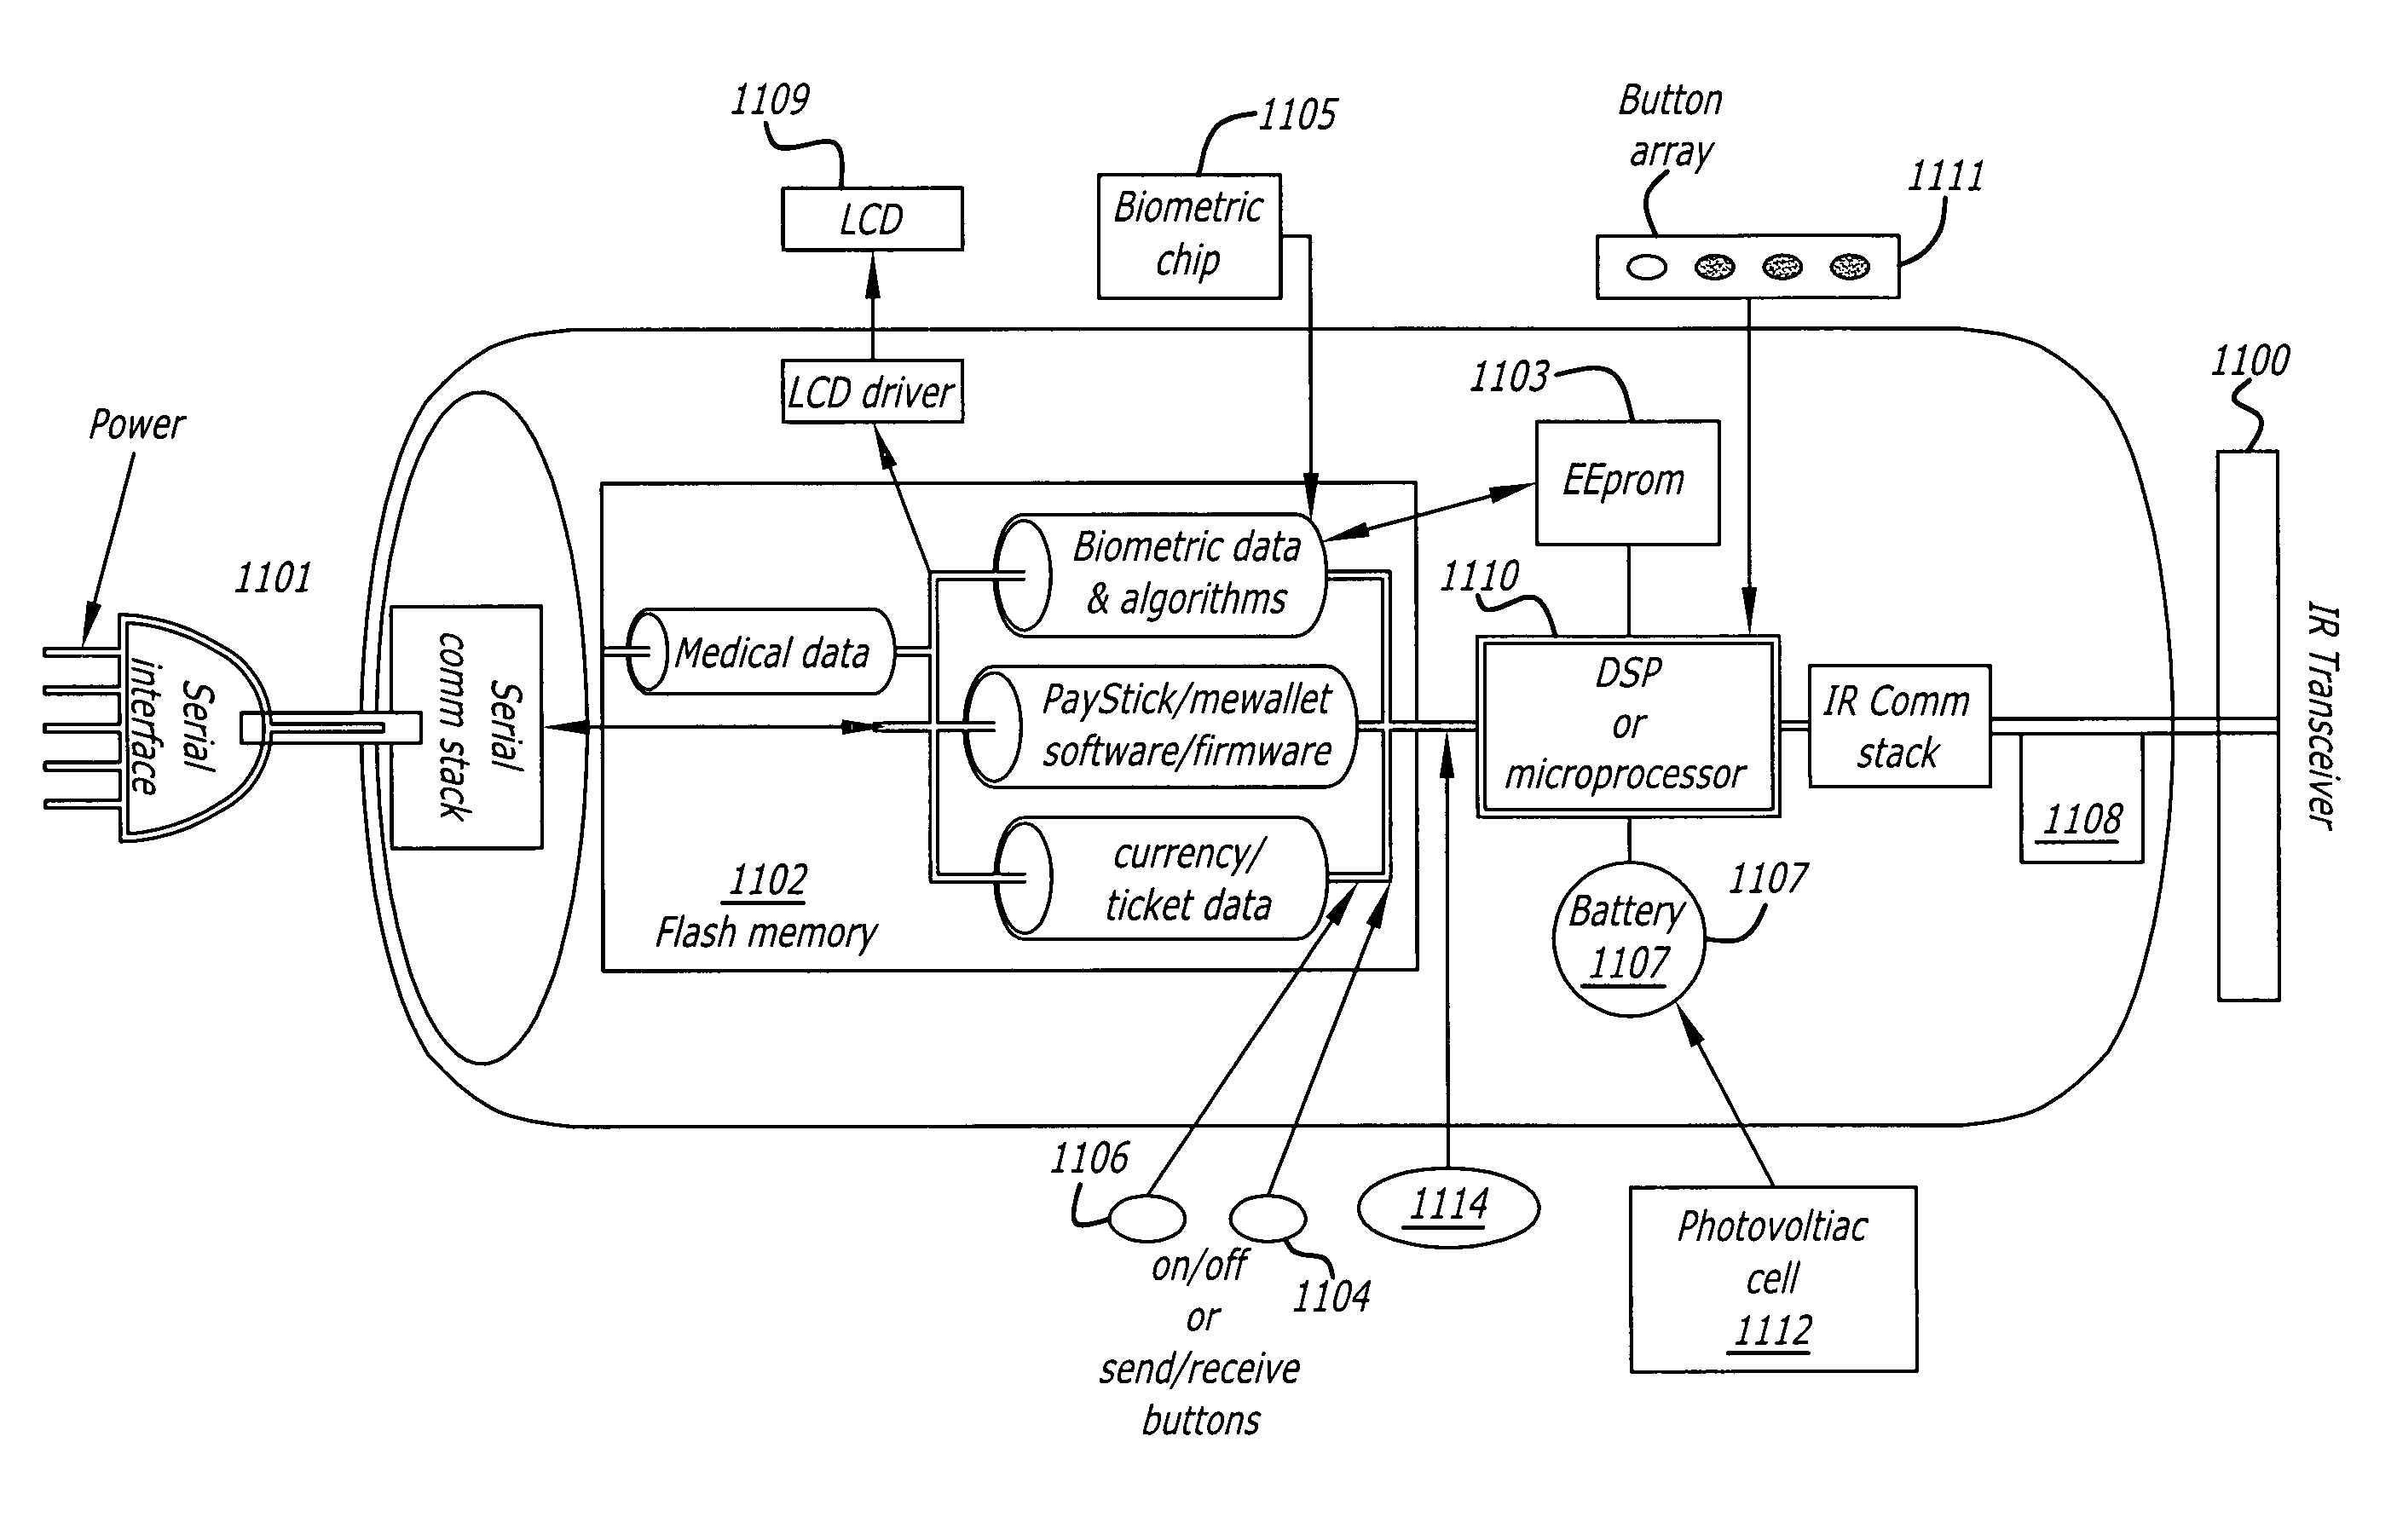 Apparatus, systems and methods for wirelessly transacting financial transfers , electronically recordable authorization transfers, and other information transfers